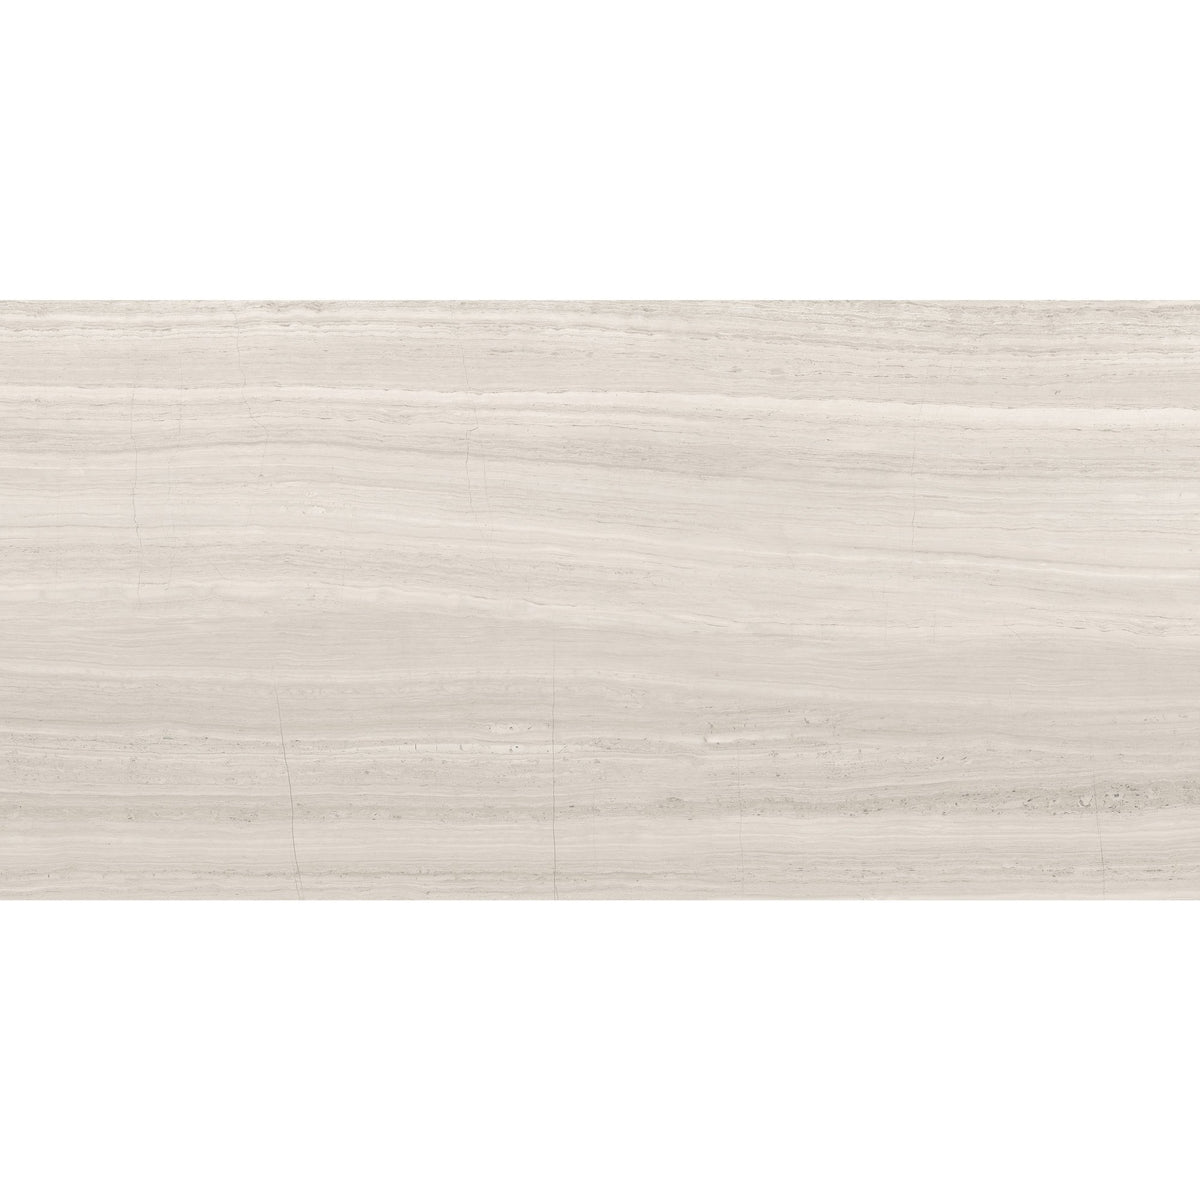 Anatolia Mayfair 24 in. x 48 in. HD Rectified Porcelain Tile - Strada Ash (Polished)